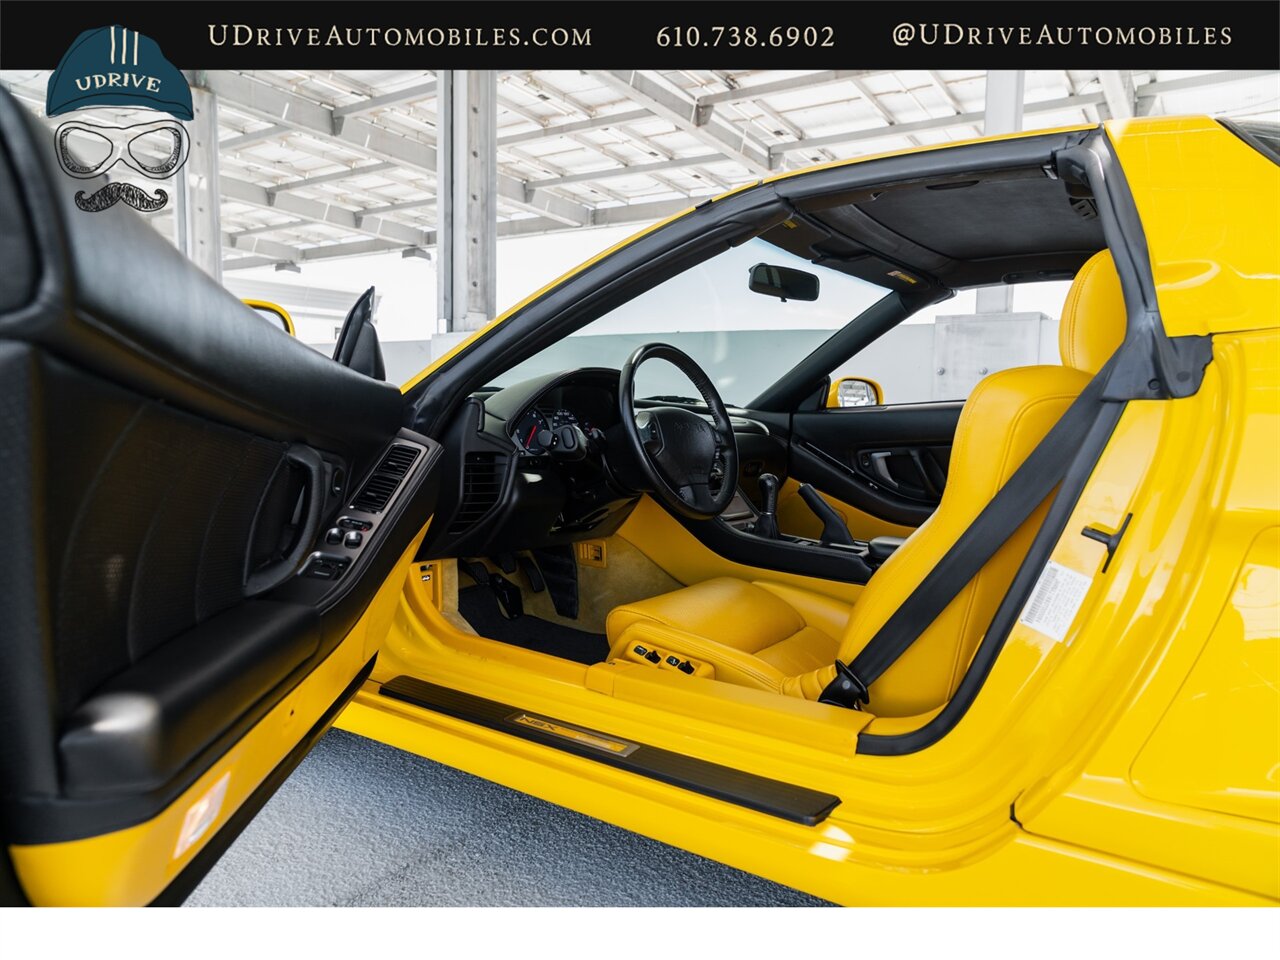 2003 Acura NSX NSX-T  Spa Yellow over Yellow Lthr 1 of 13 Produced - Photo 31 - West Chester, PA 19382